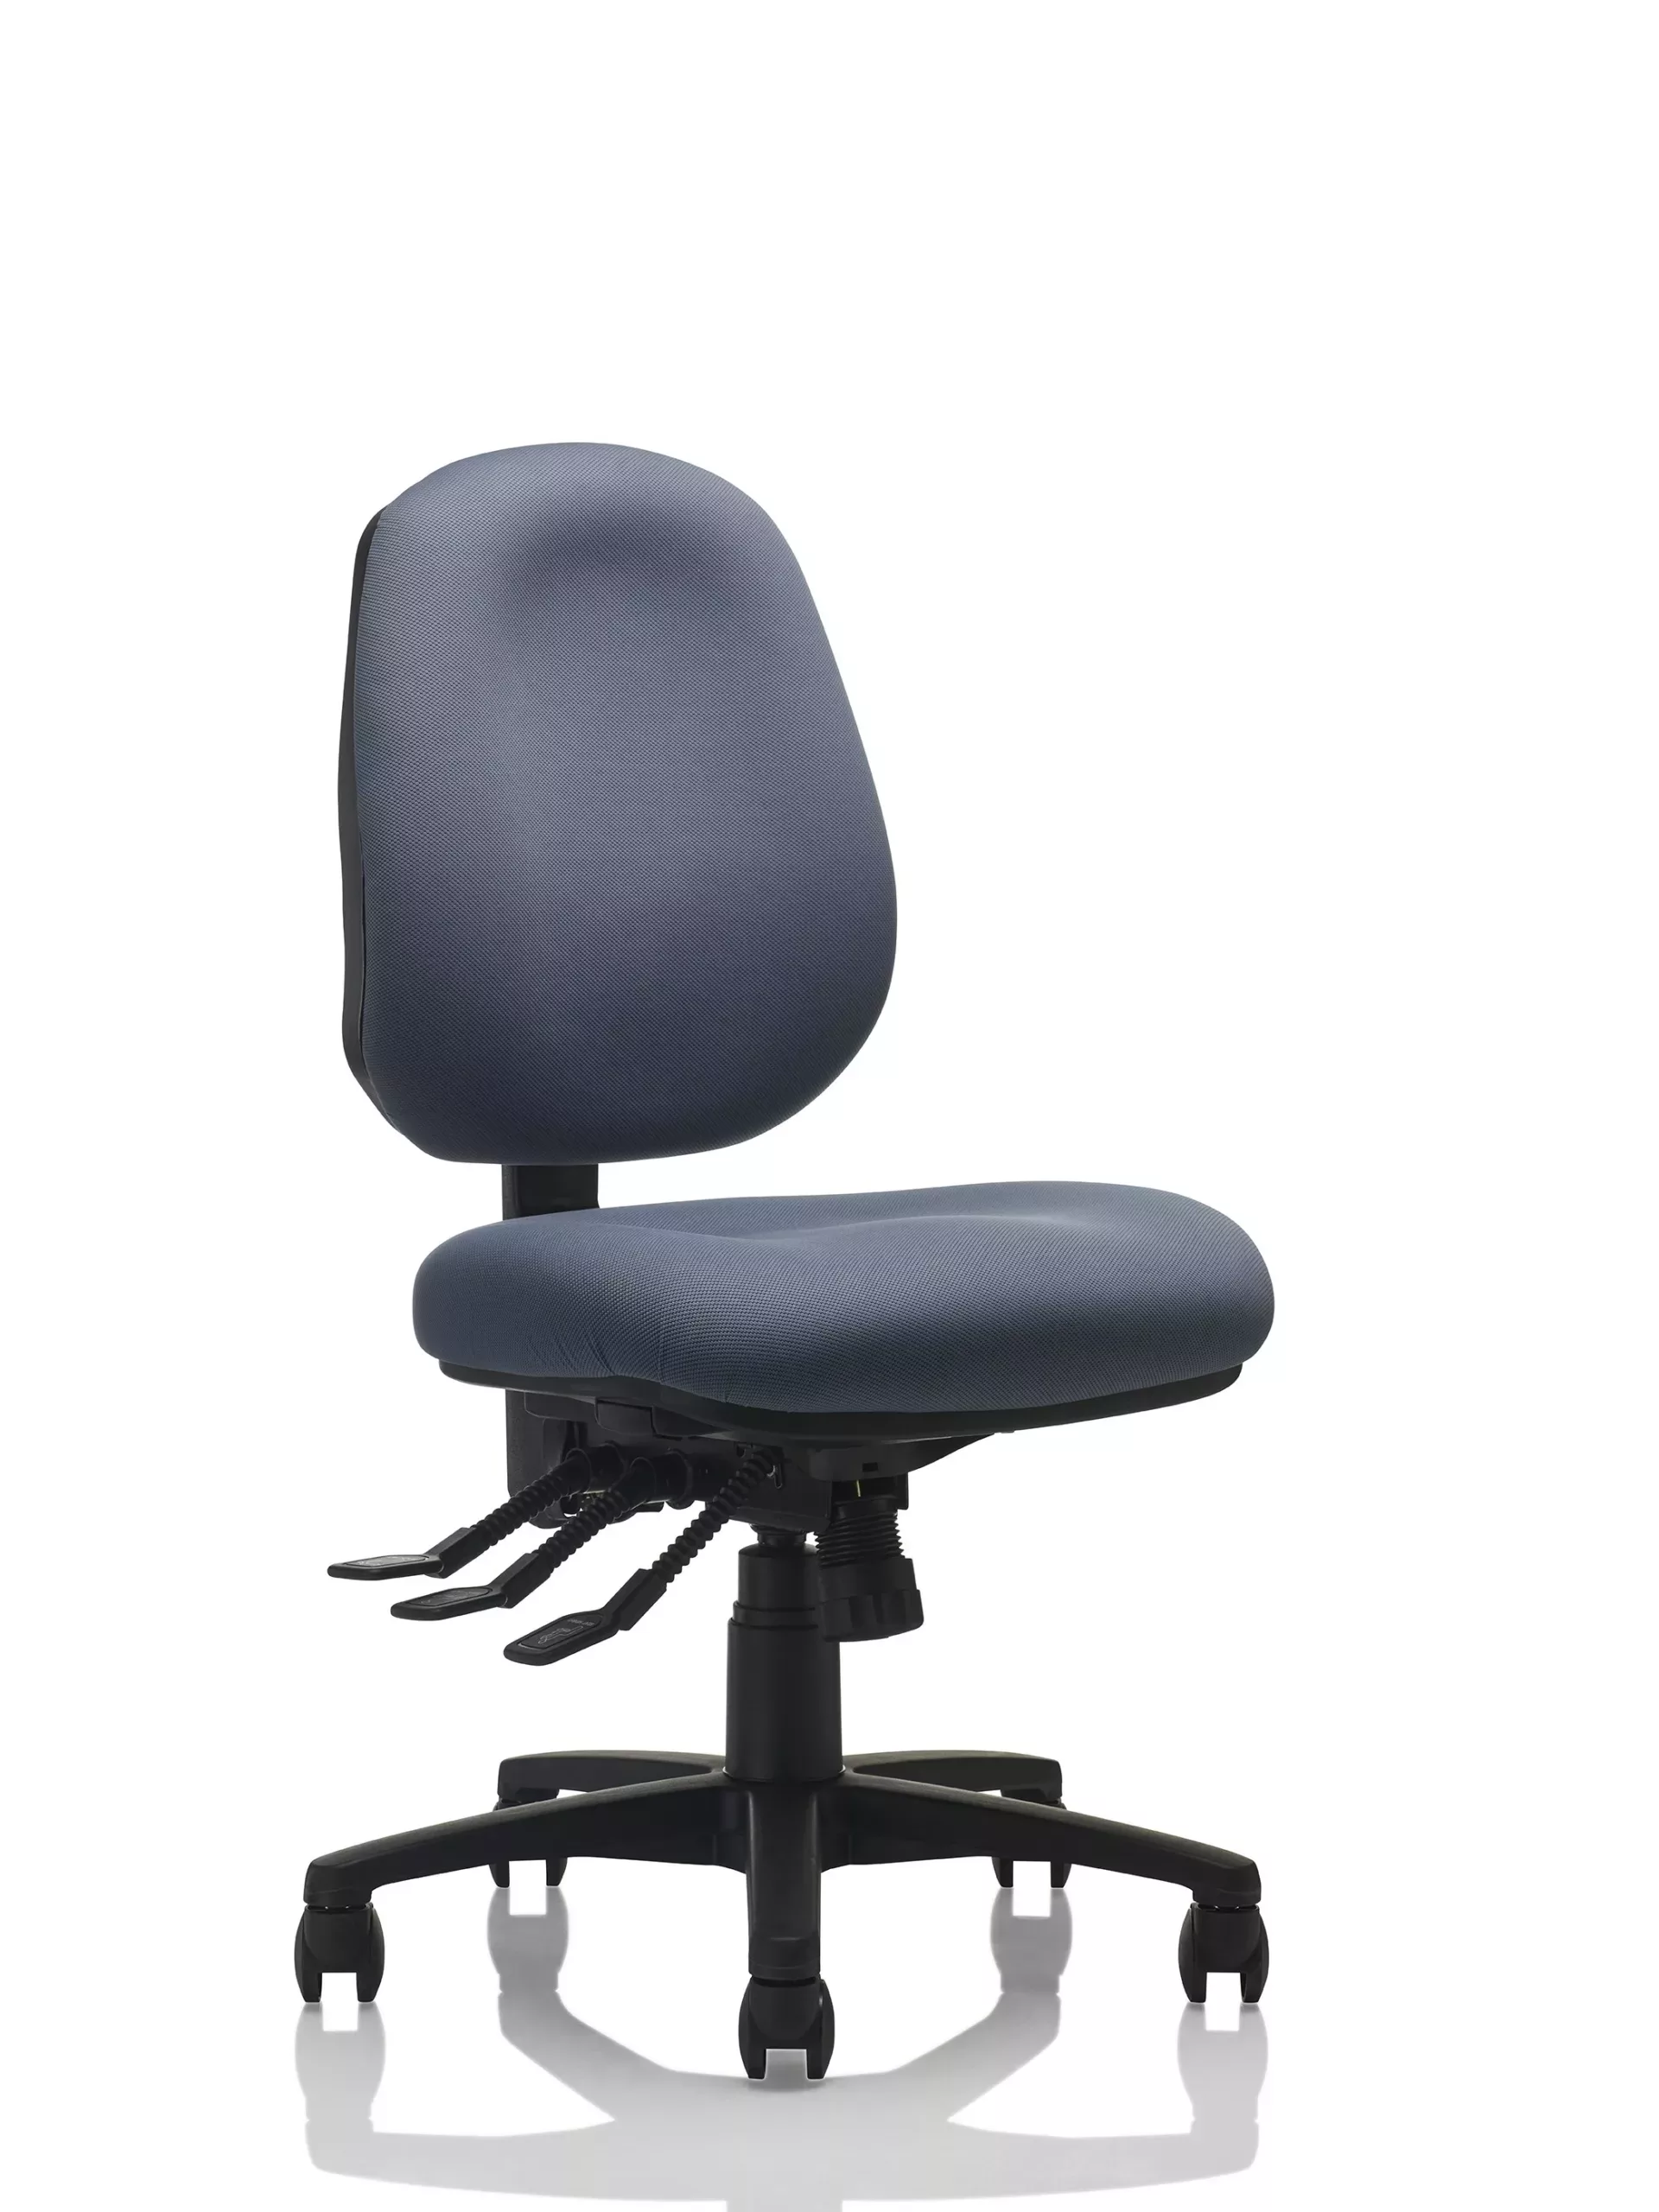 lumbar support chairs